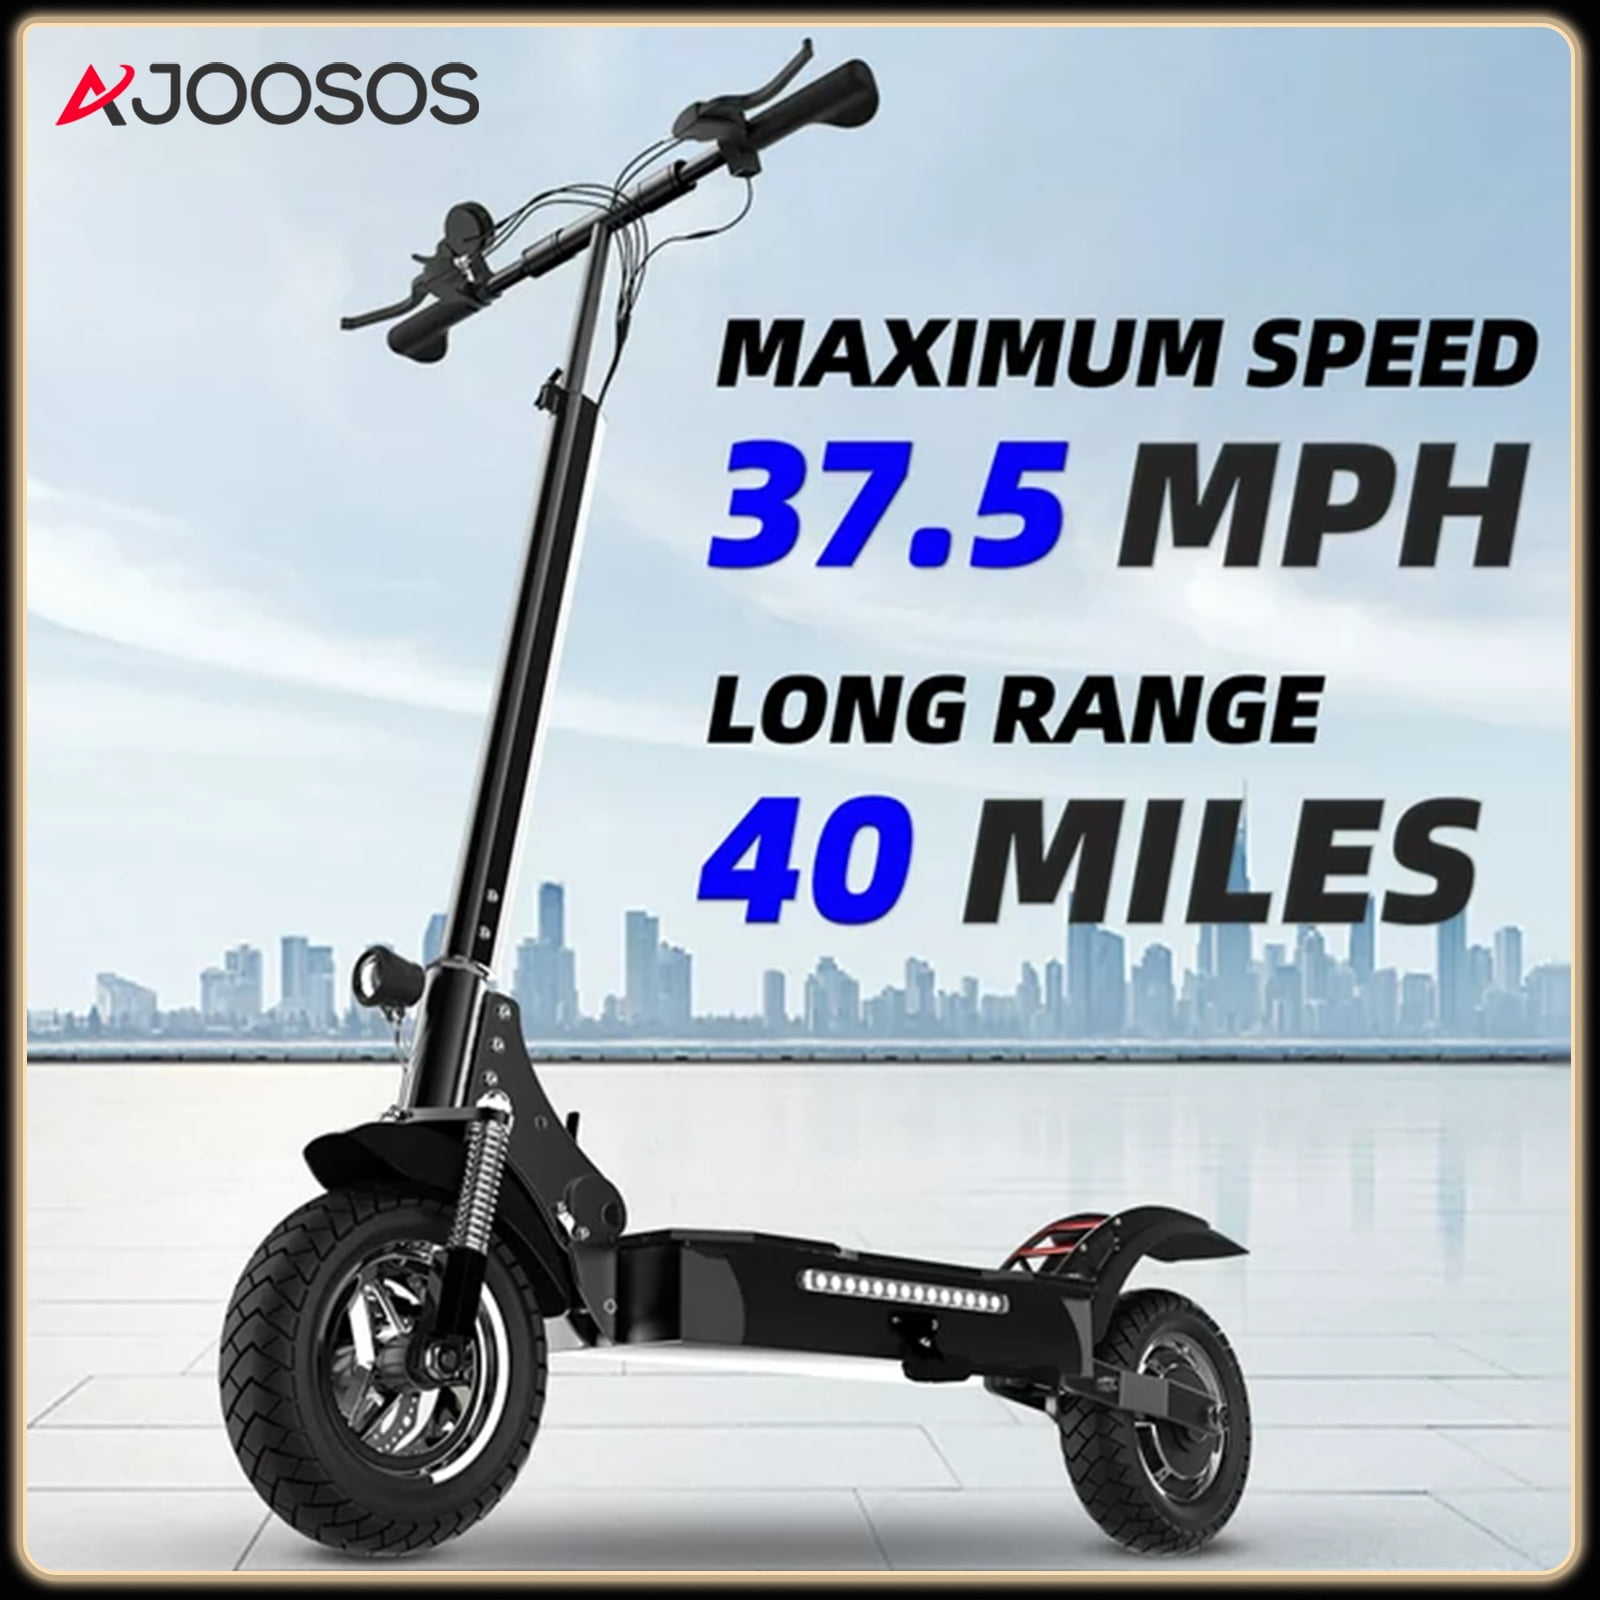 AJOOSOS X750 Electric Scooter, 37.5 mph Speed, 40 Miles Range, Fast Electric Scooter - Walmart.com